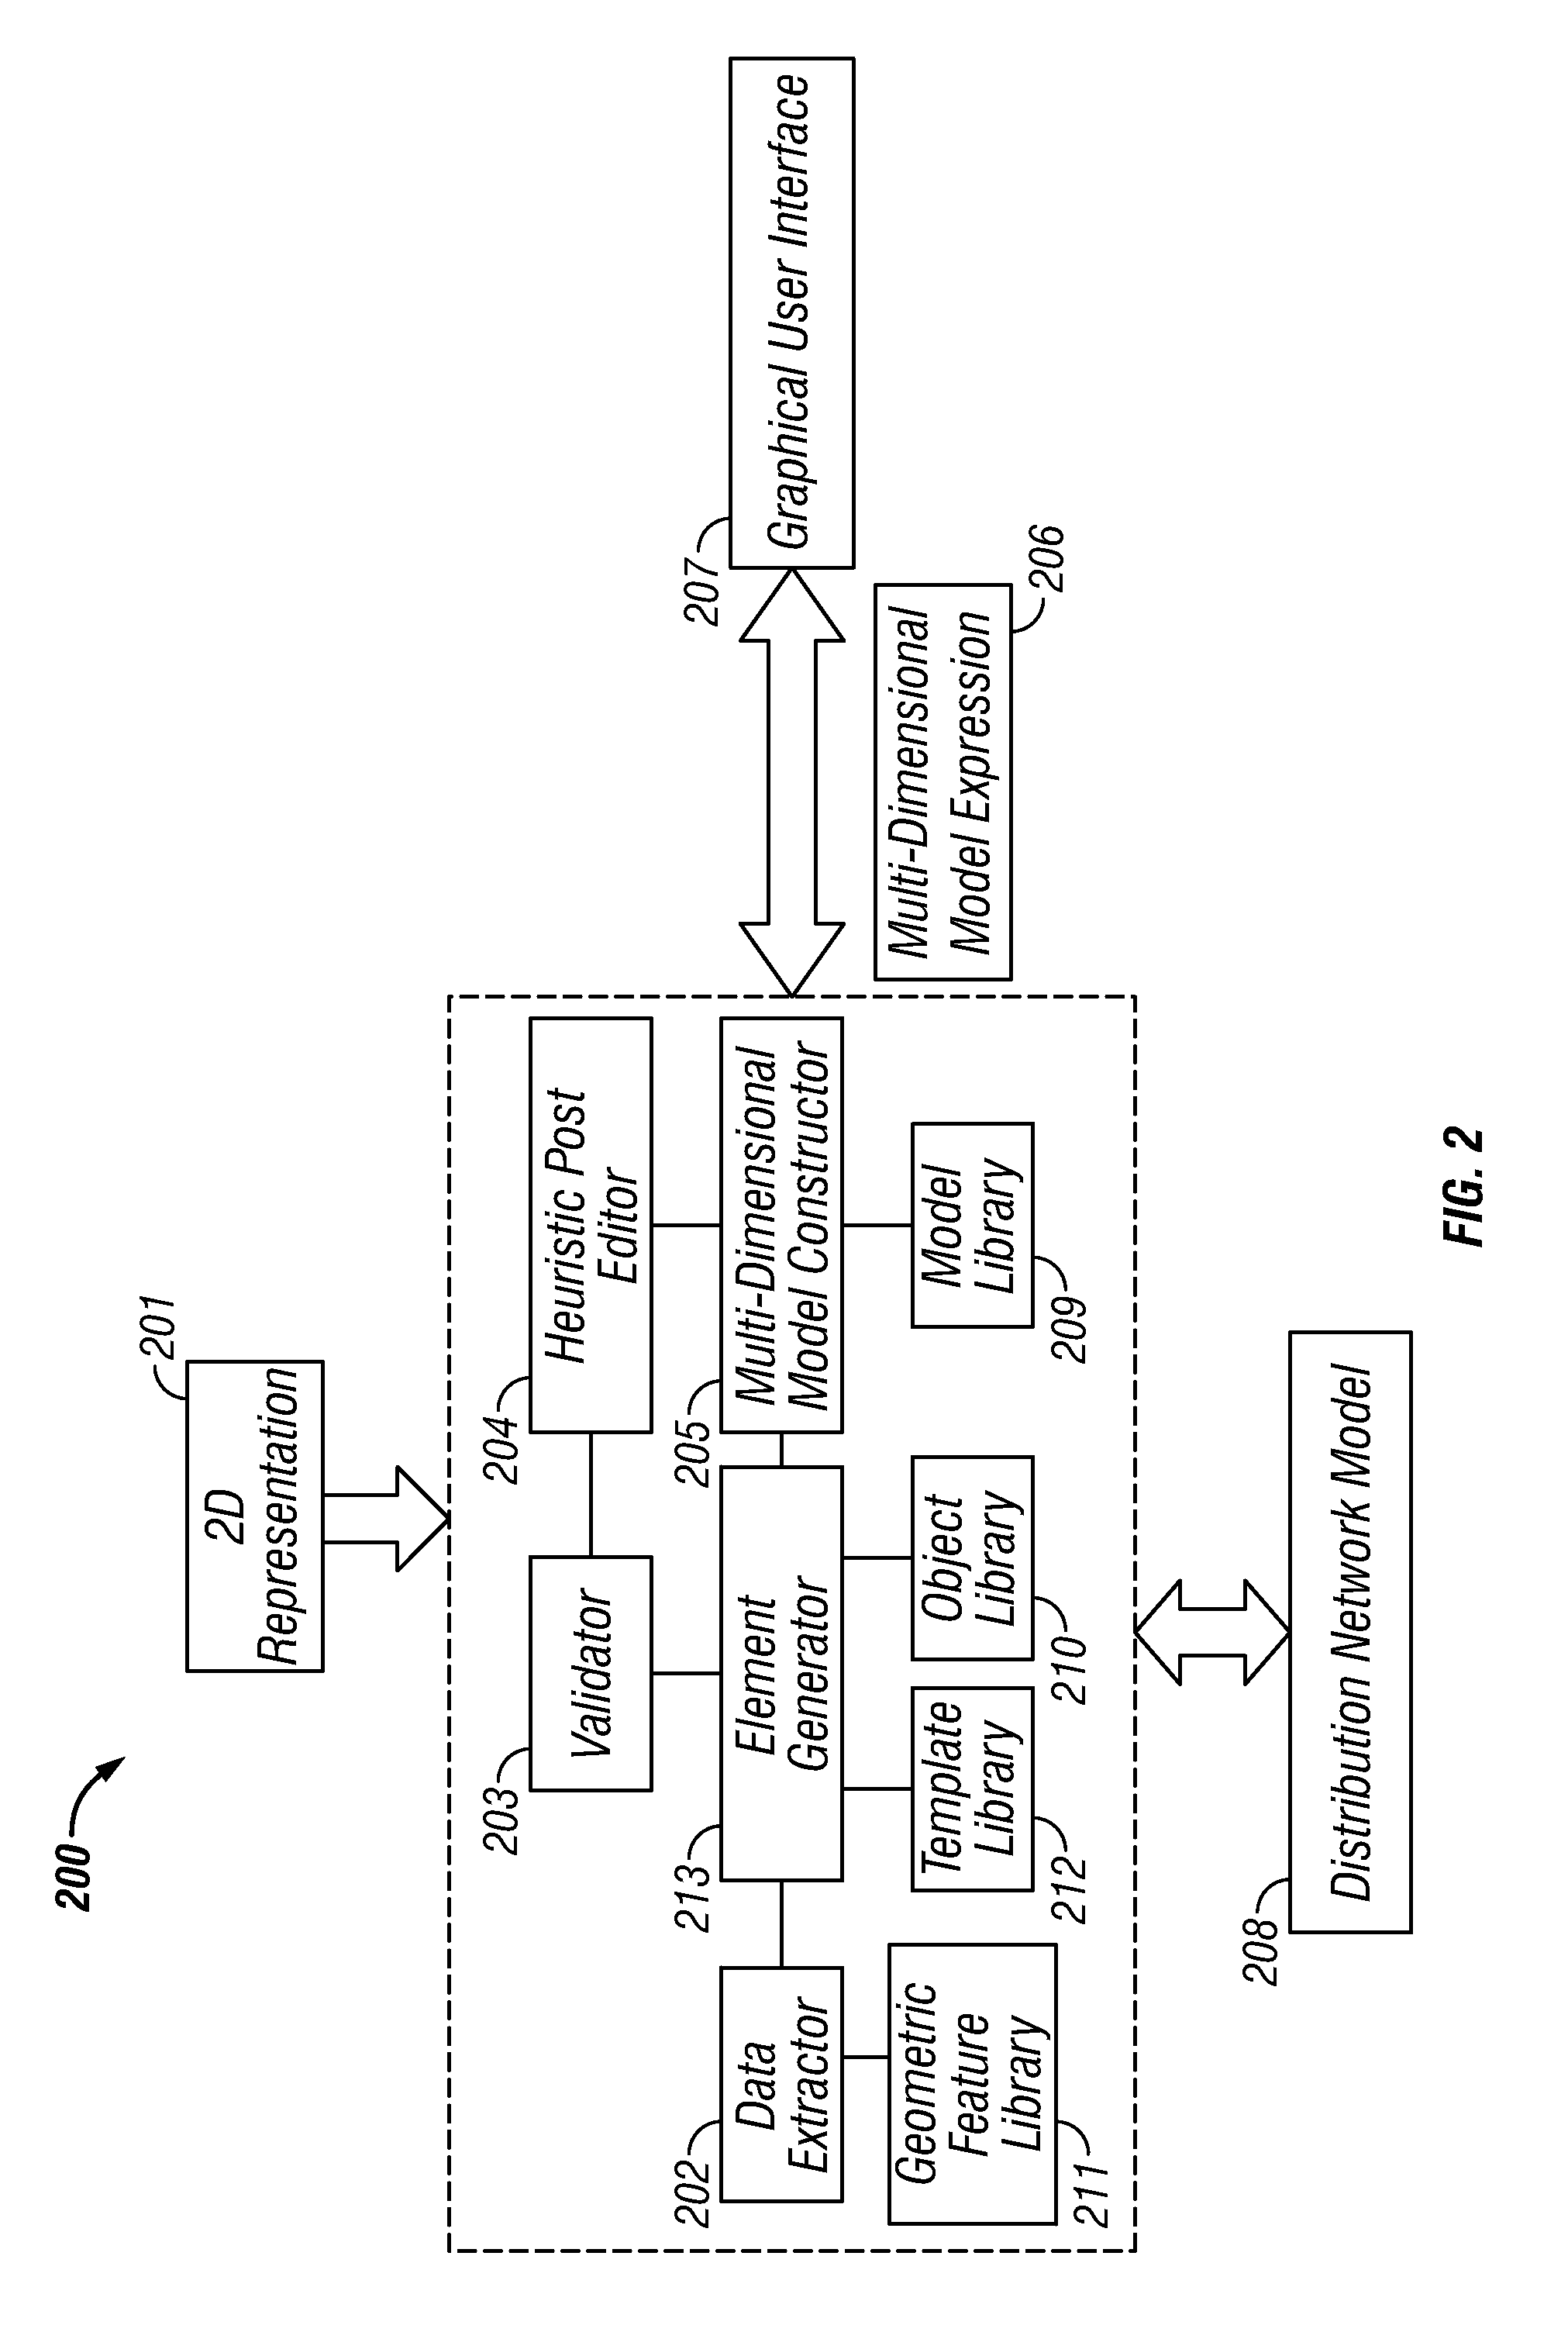 Methods and systems for constructing multi-dimensional data models for distribution networks